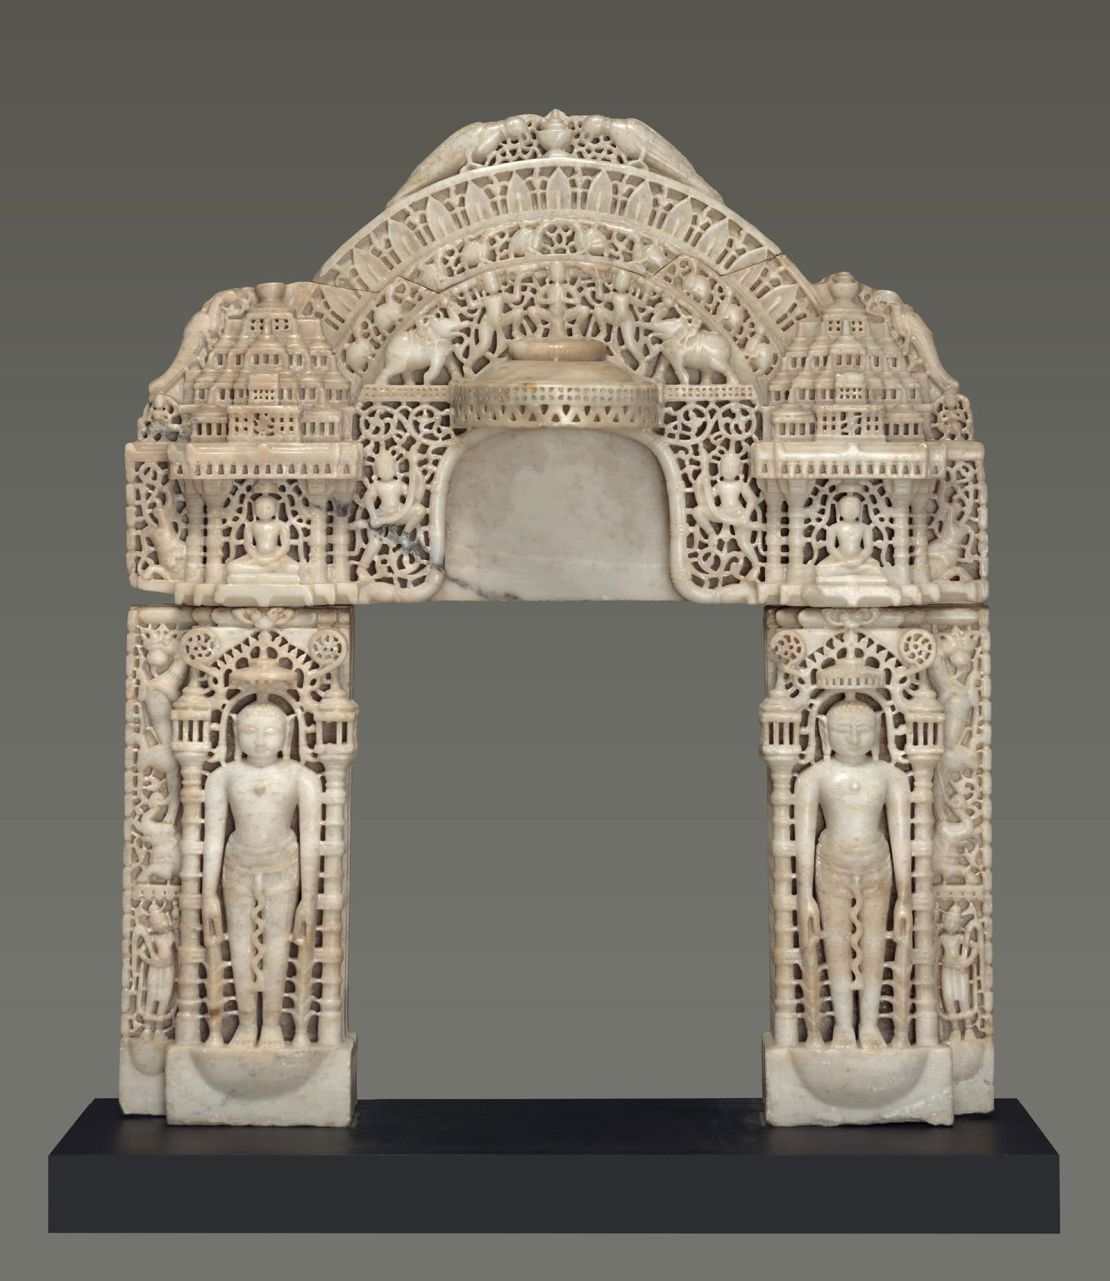 The "Arch Parikara" which dates to the 12th or 13th centuries.